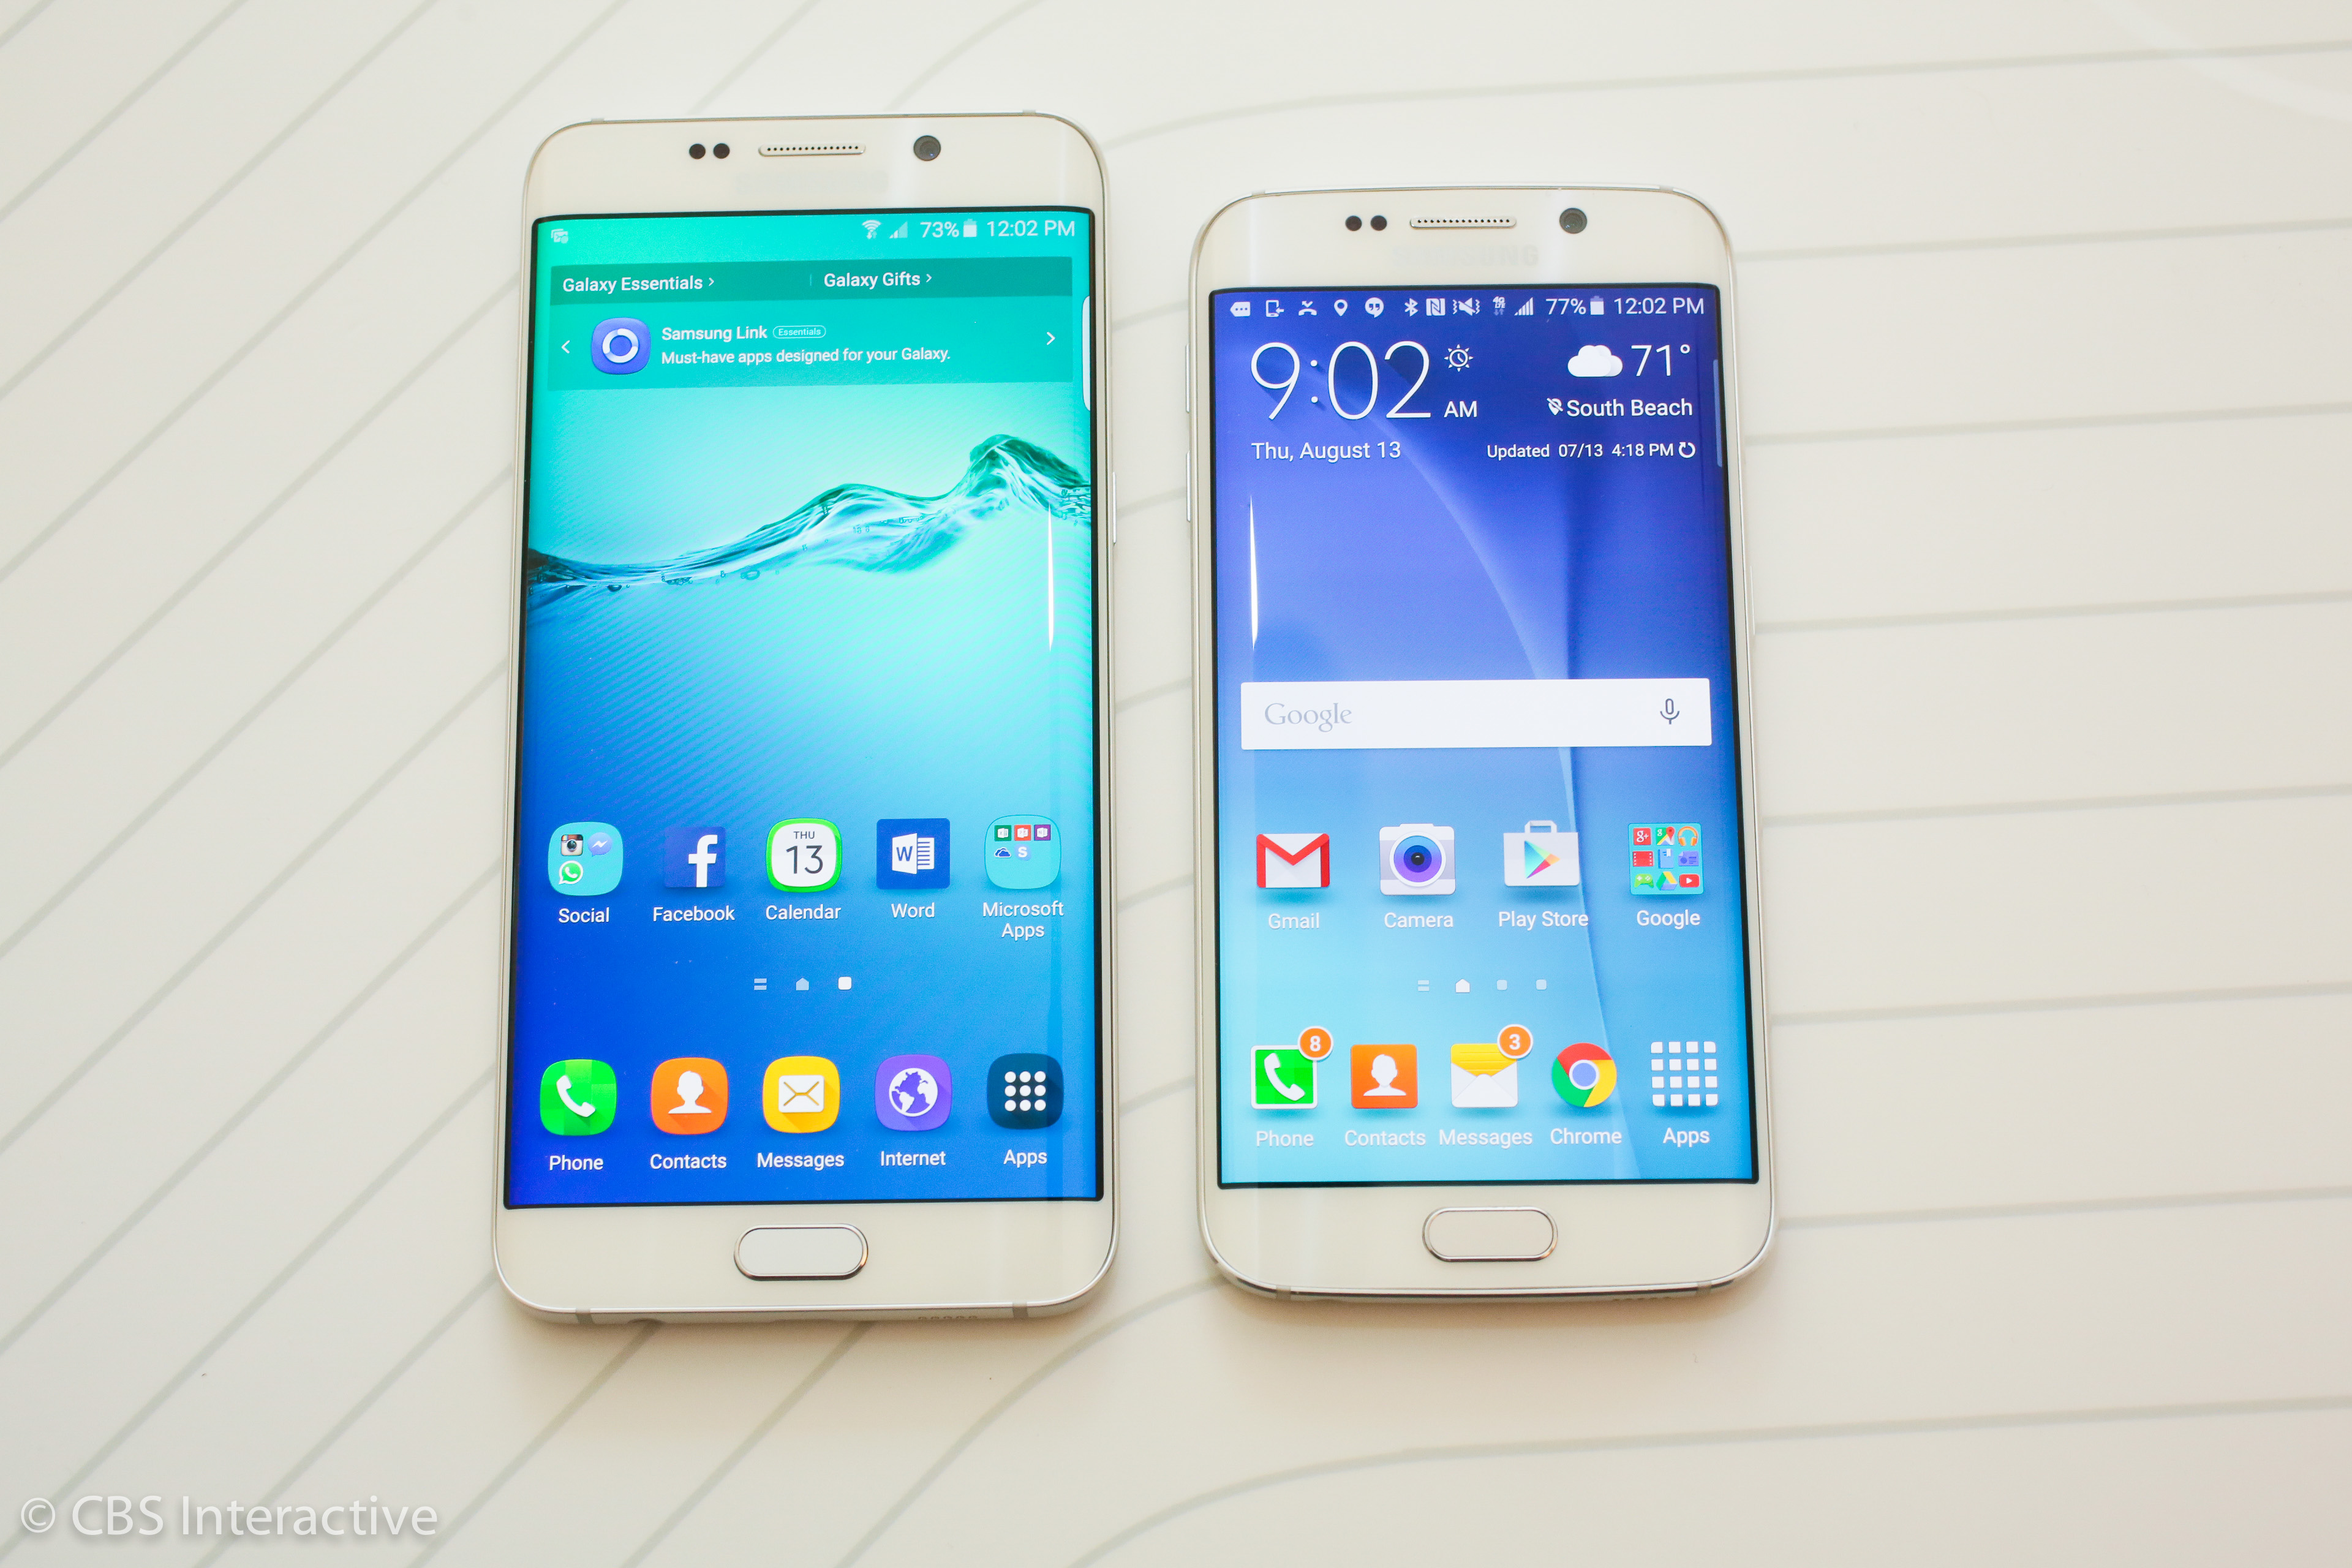 plakband Lift Ijsbeer Samsung Galaxy S6 Edge+ release date, news, price and specs - CNET